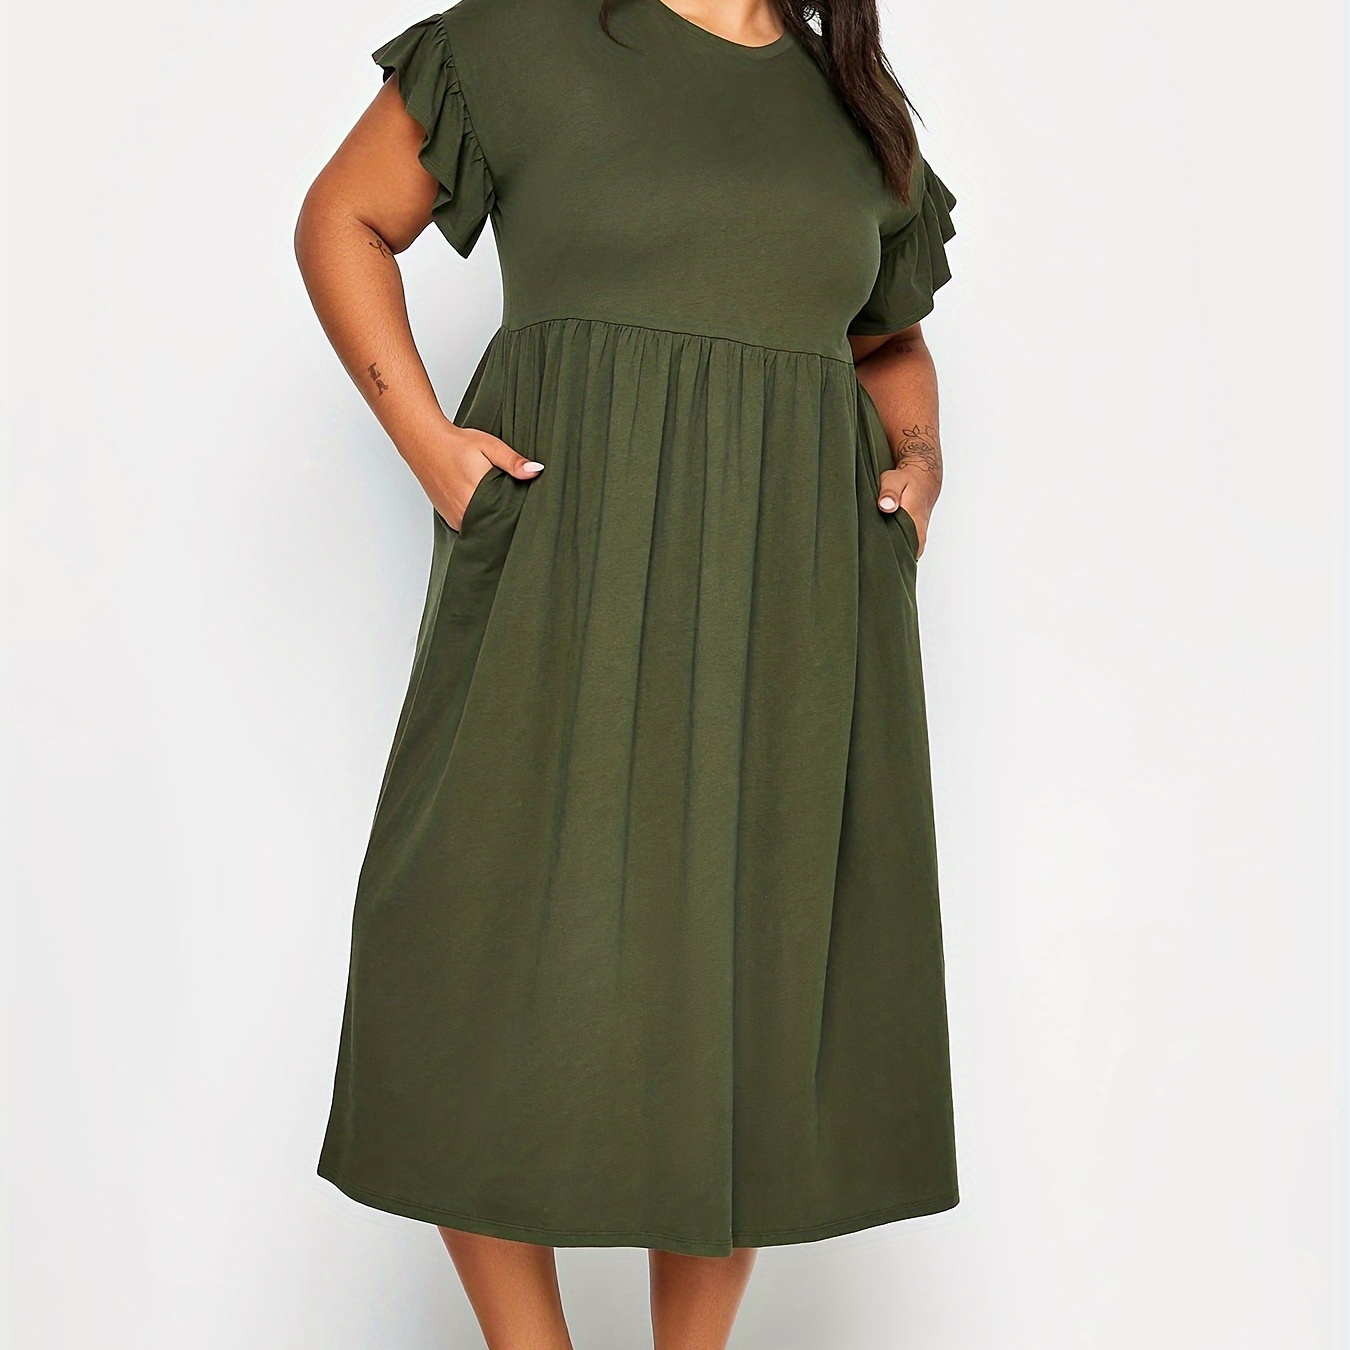 

Plus Size Solid Ruched Crew Neck Dress, Casual Ruffle Trim Short Sleeve Dress For Spring & Summer, Women's Plus Size Clothing